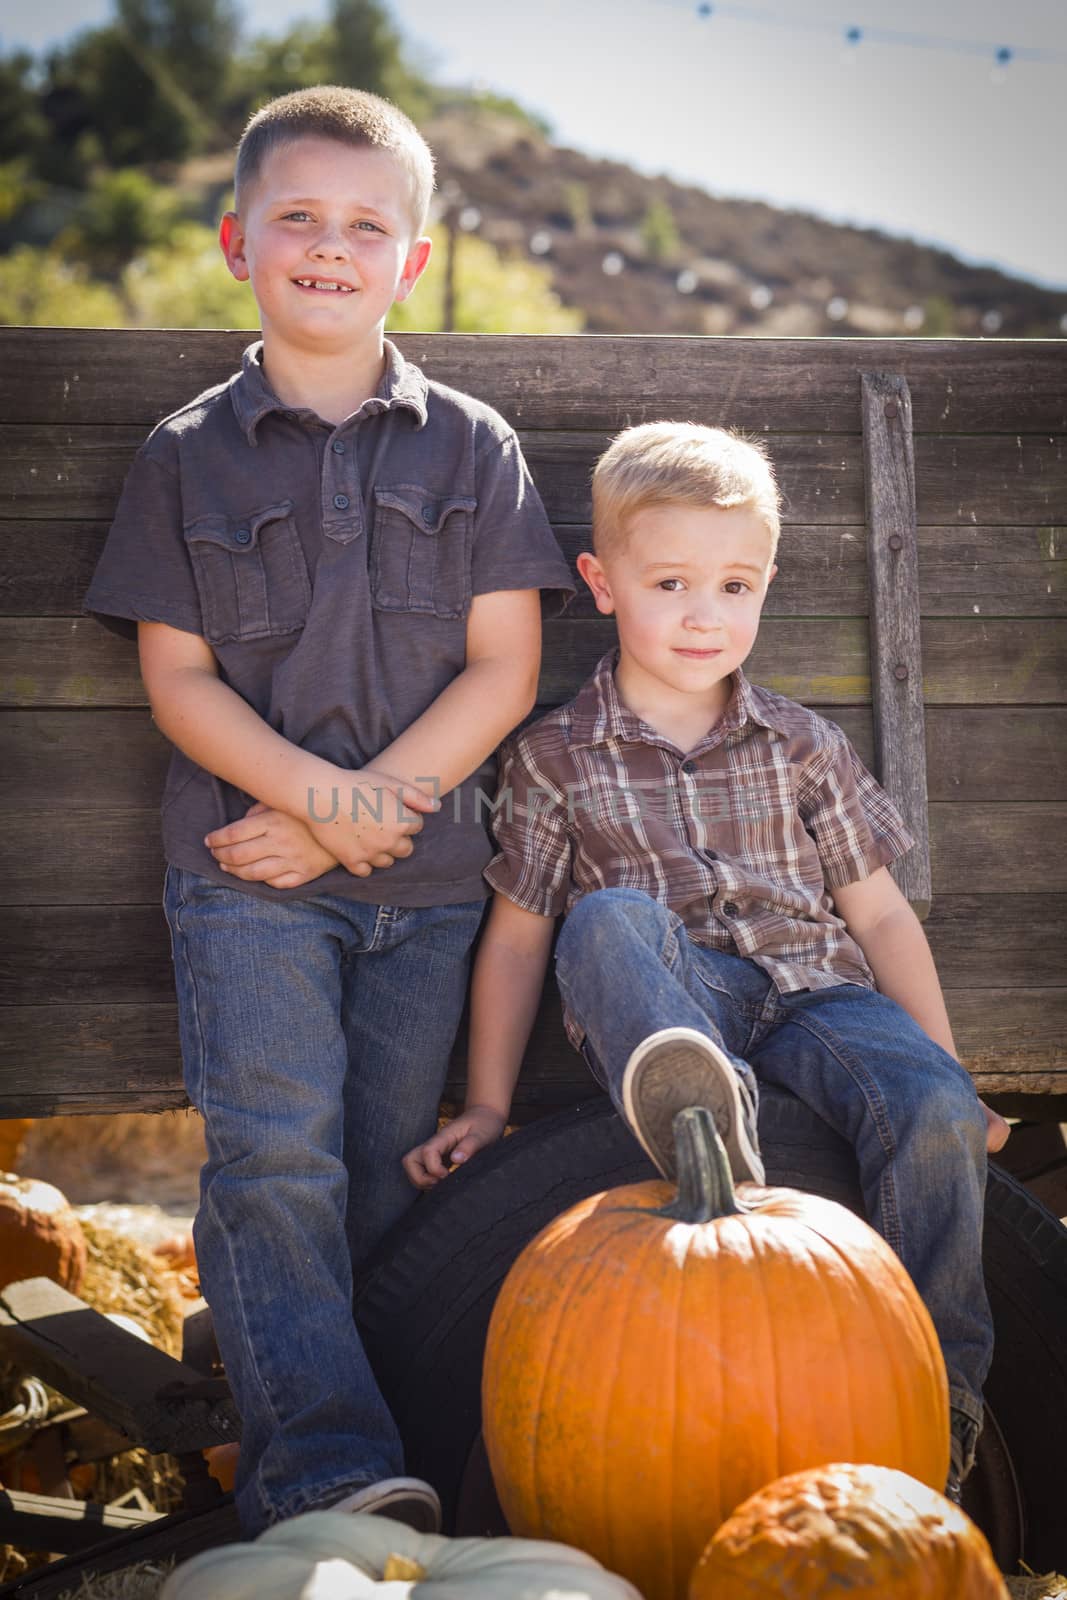 Two Boys at the Pumpkin Patch Against Antique Wood Wagon by Feverpitched